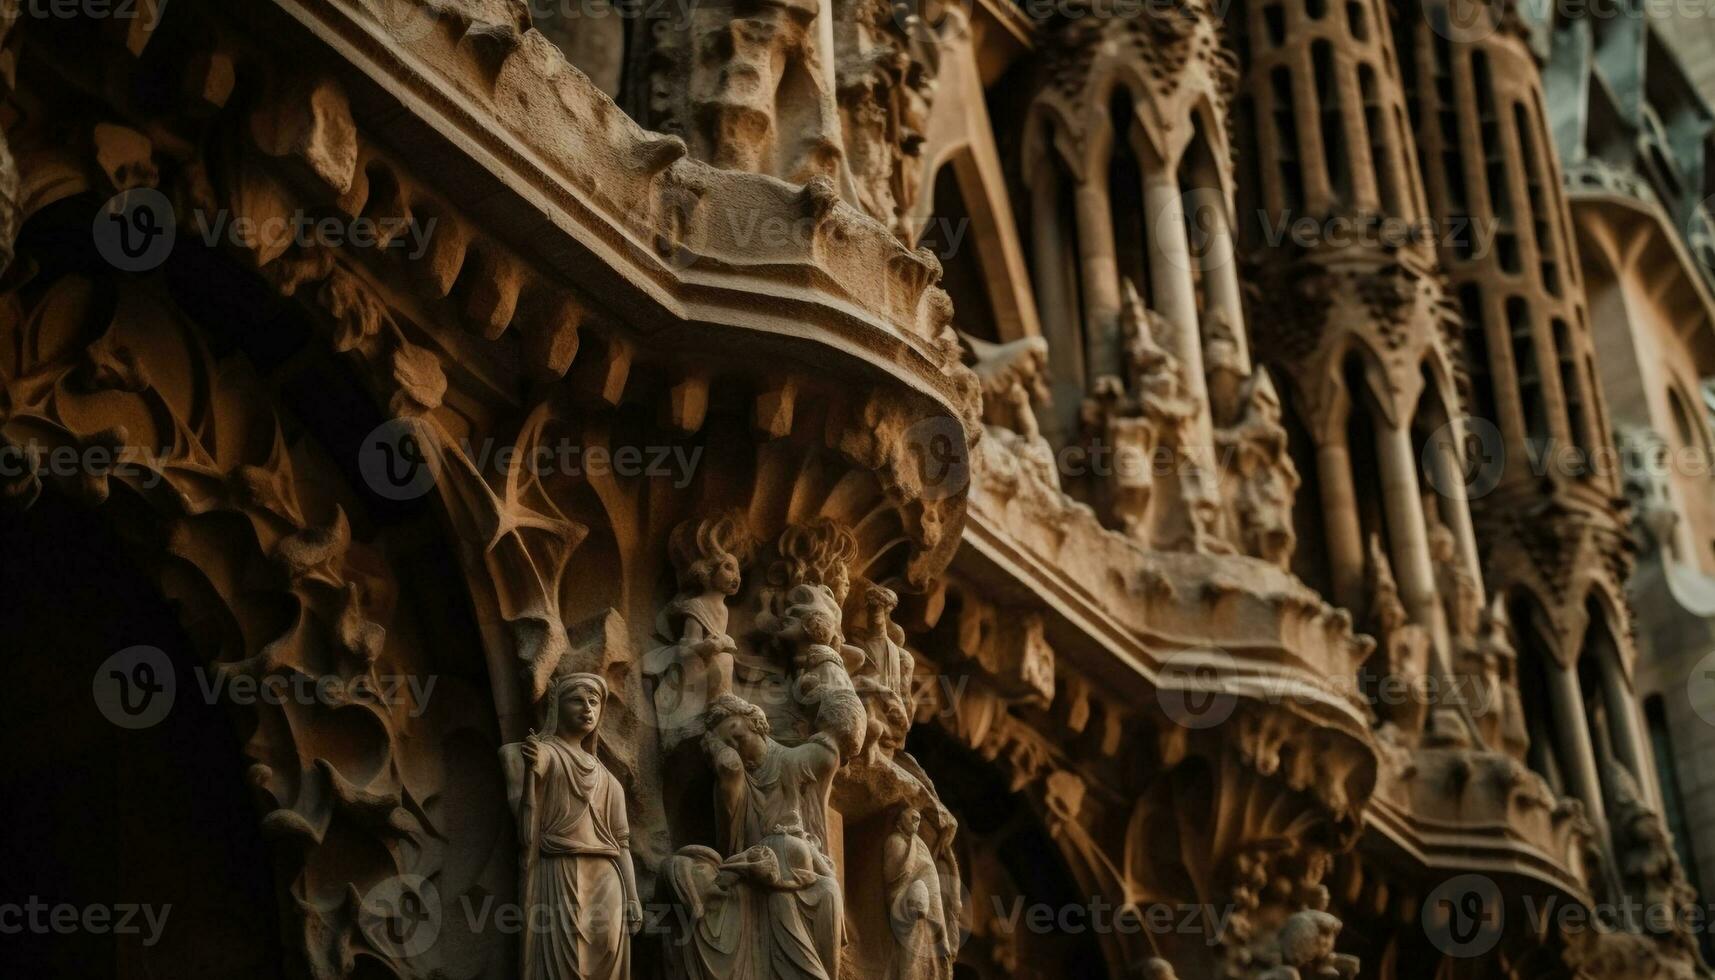 Medieval basilica with ornate gothic architecture and sculpture generated by AI photo